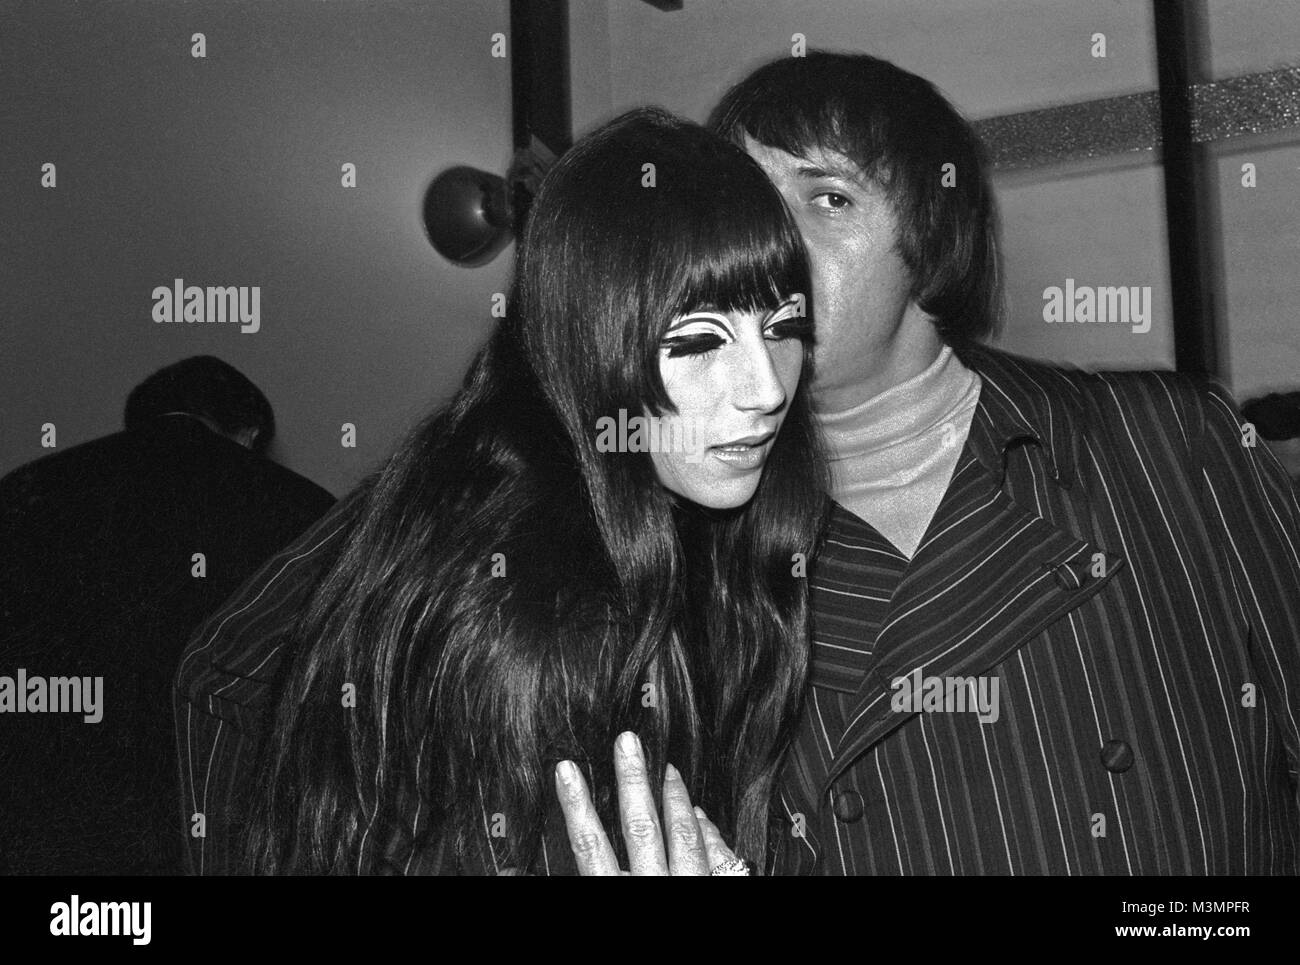 Musicians Sonny and Cher at the PR launch party of the Donovan’s Barabajagal album. September 1969. The party was held at a famous pub, The Factory, in Hollywood, with hostess and host 'Mama' Cass Elliott and Kirk Douglas. Stock Photo